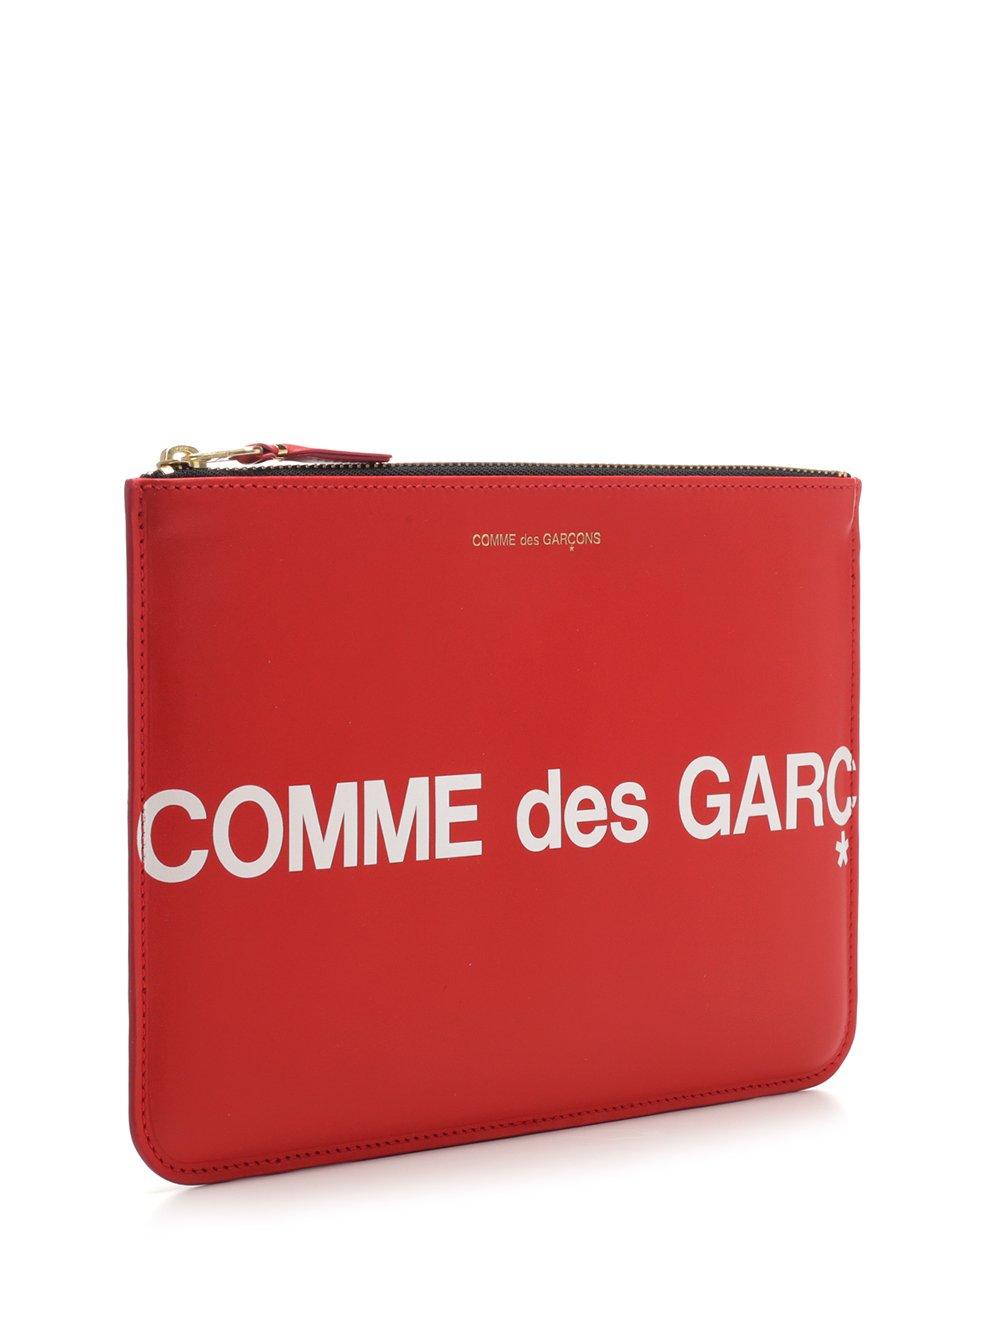 Comme des Garçons Leather Logo Print Pouch Bag in Red - Lyst